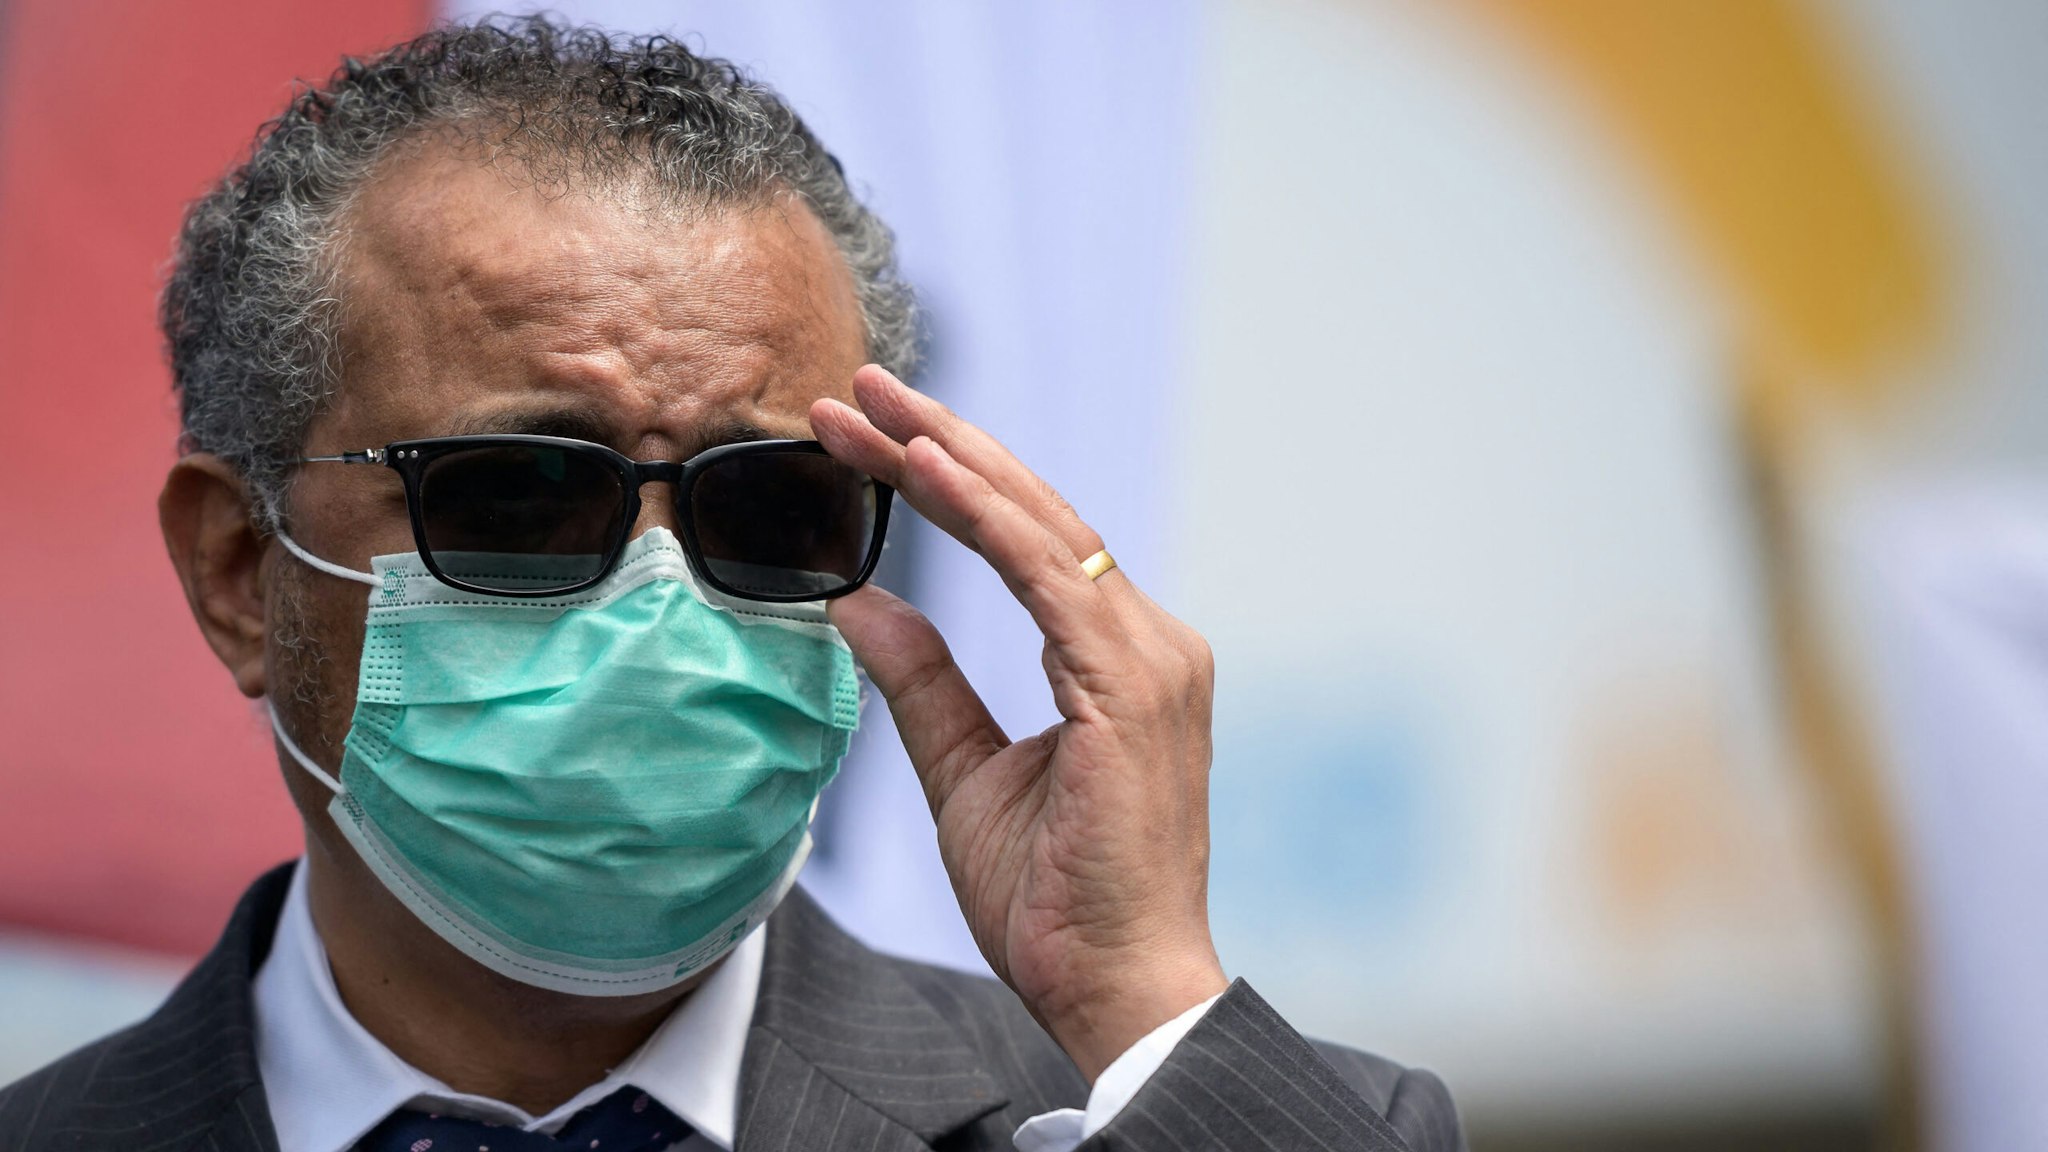 World Health Organization (WHO) Director-General Tedros Adhanom Ghebreyesus adjusts his glasses during a meeting with Doctors for Extinction Rebellion in front of the WHO headquarters during a protest on the sideline of the WHO's World Health Assembly in Geneva on May 29, 2021. - Hundreds of health workers marched to the WHO demanding that authorities in all countries recognise and act to counter the health risks of climate change.